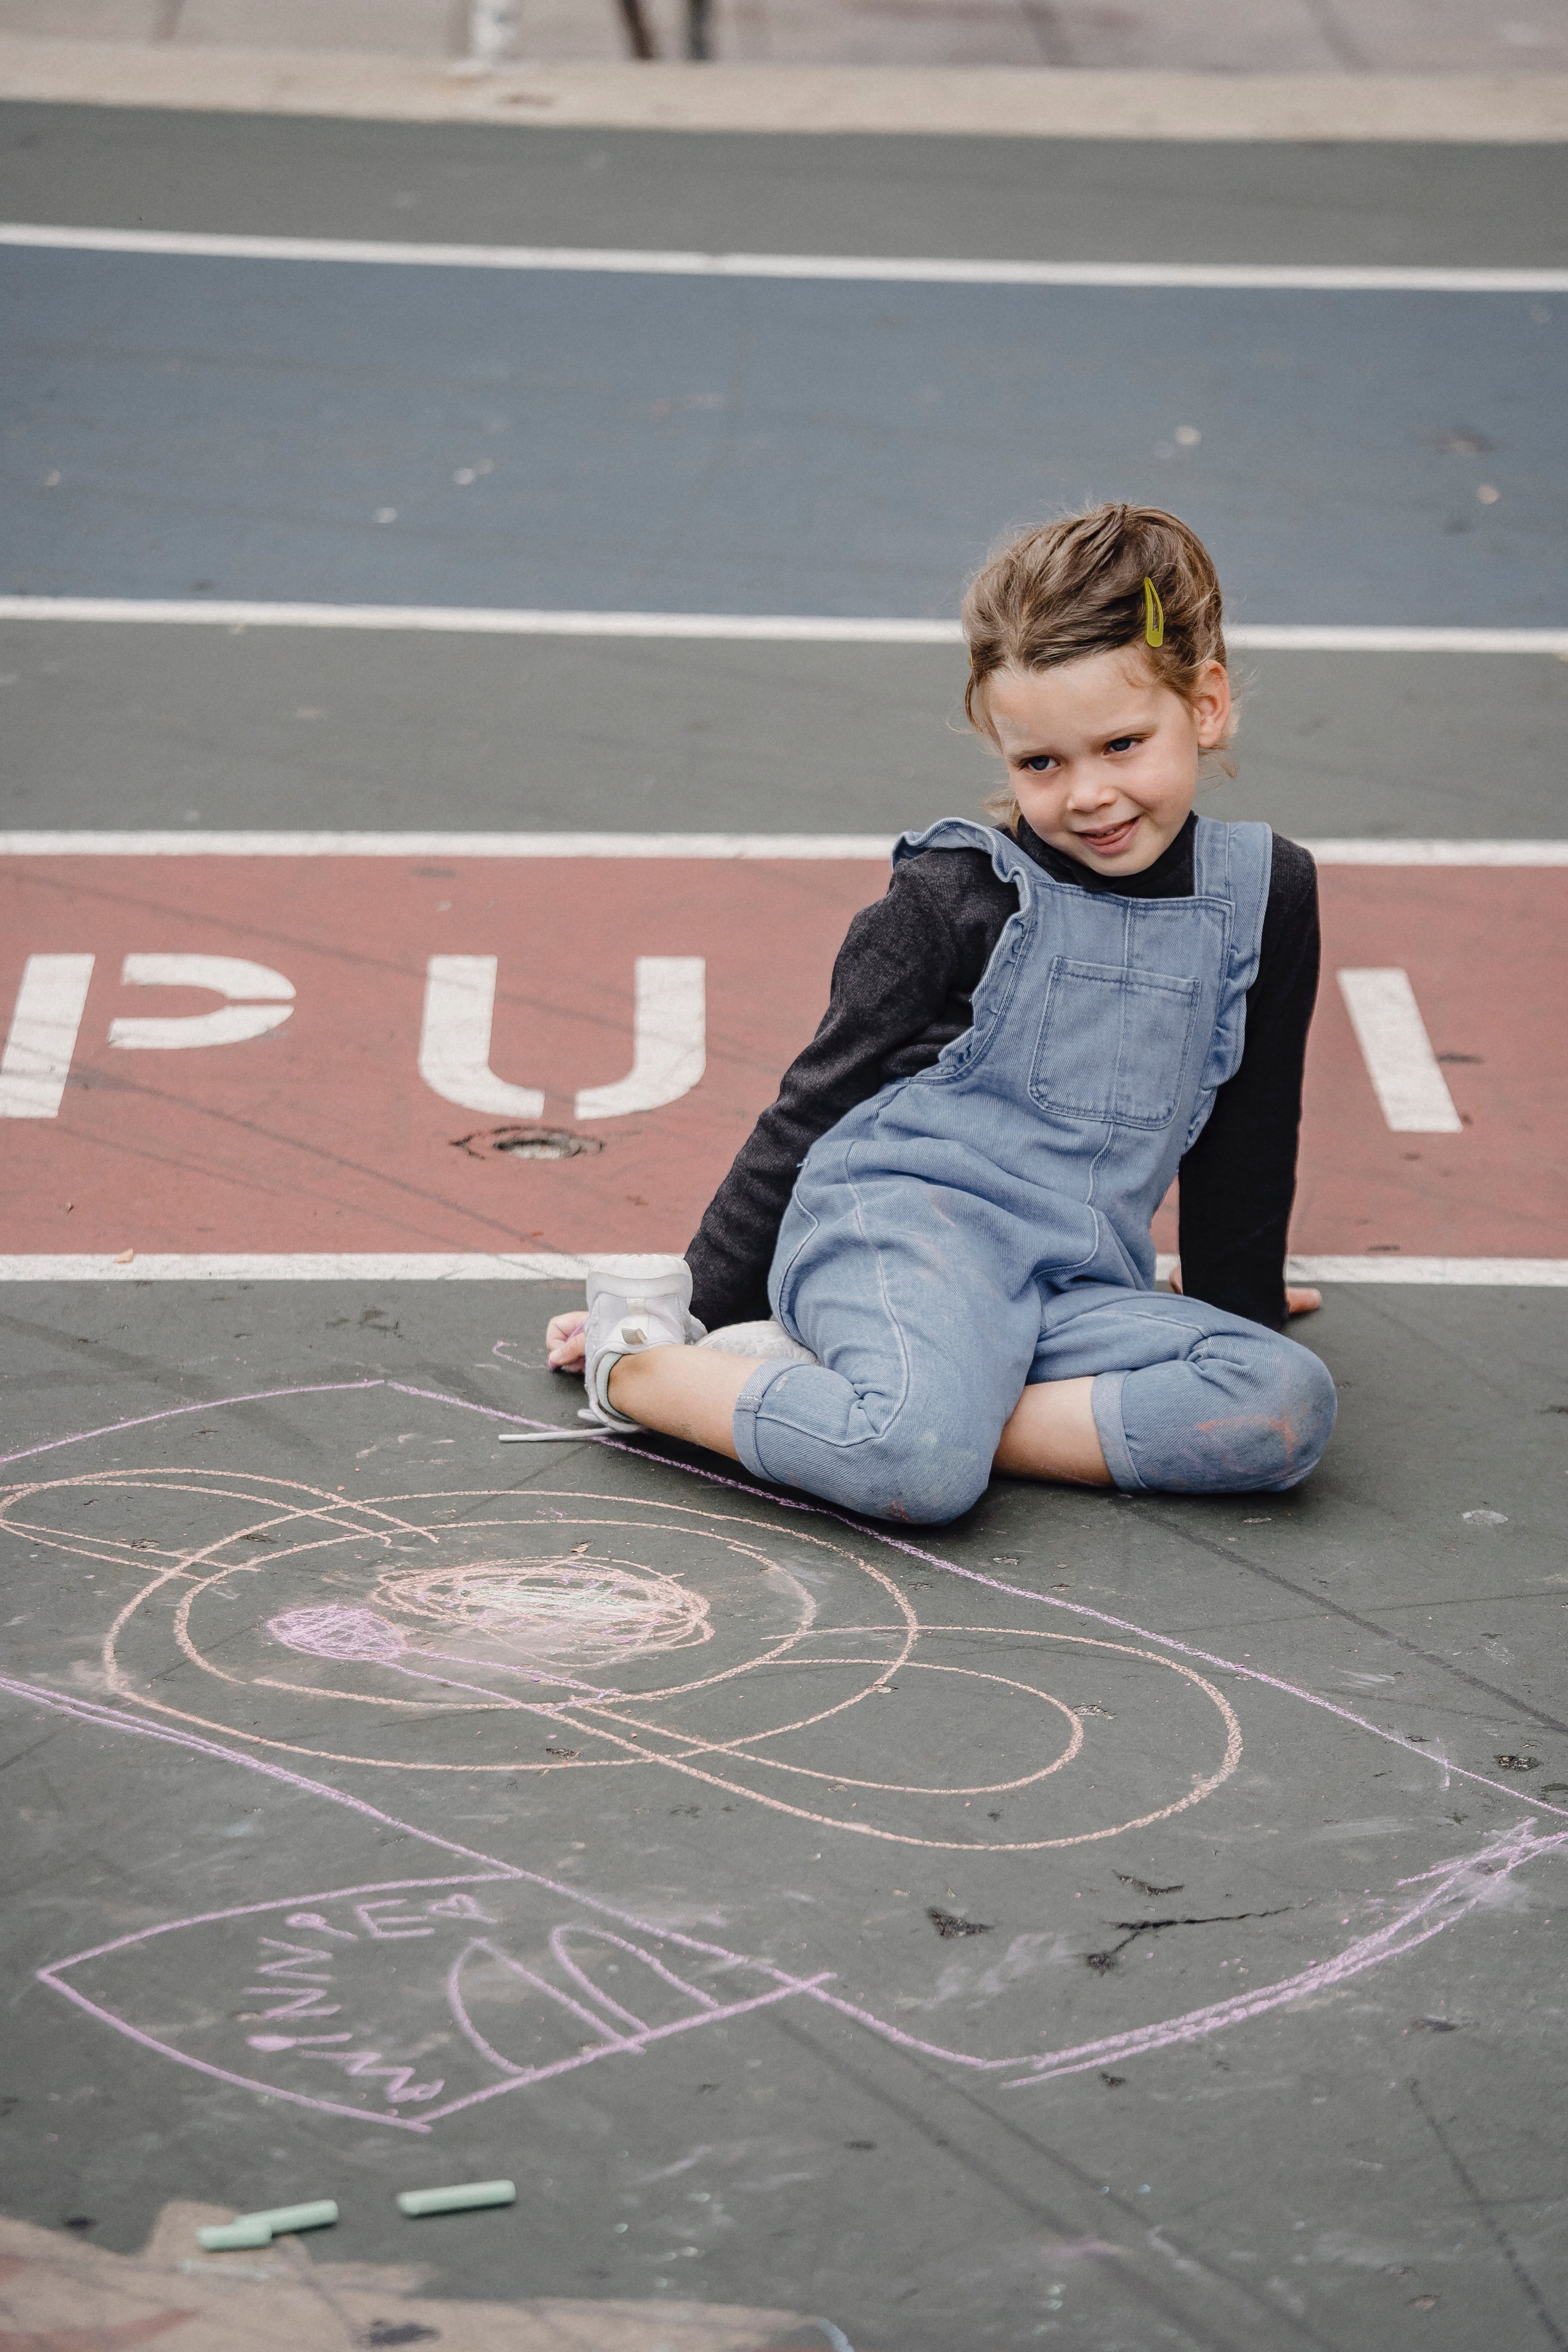 Pictured - A young girl sitting on asphalt neat chalk painting | Source: Pexels 